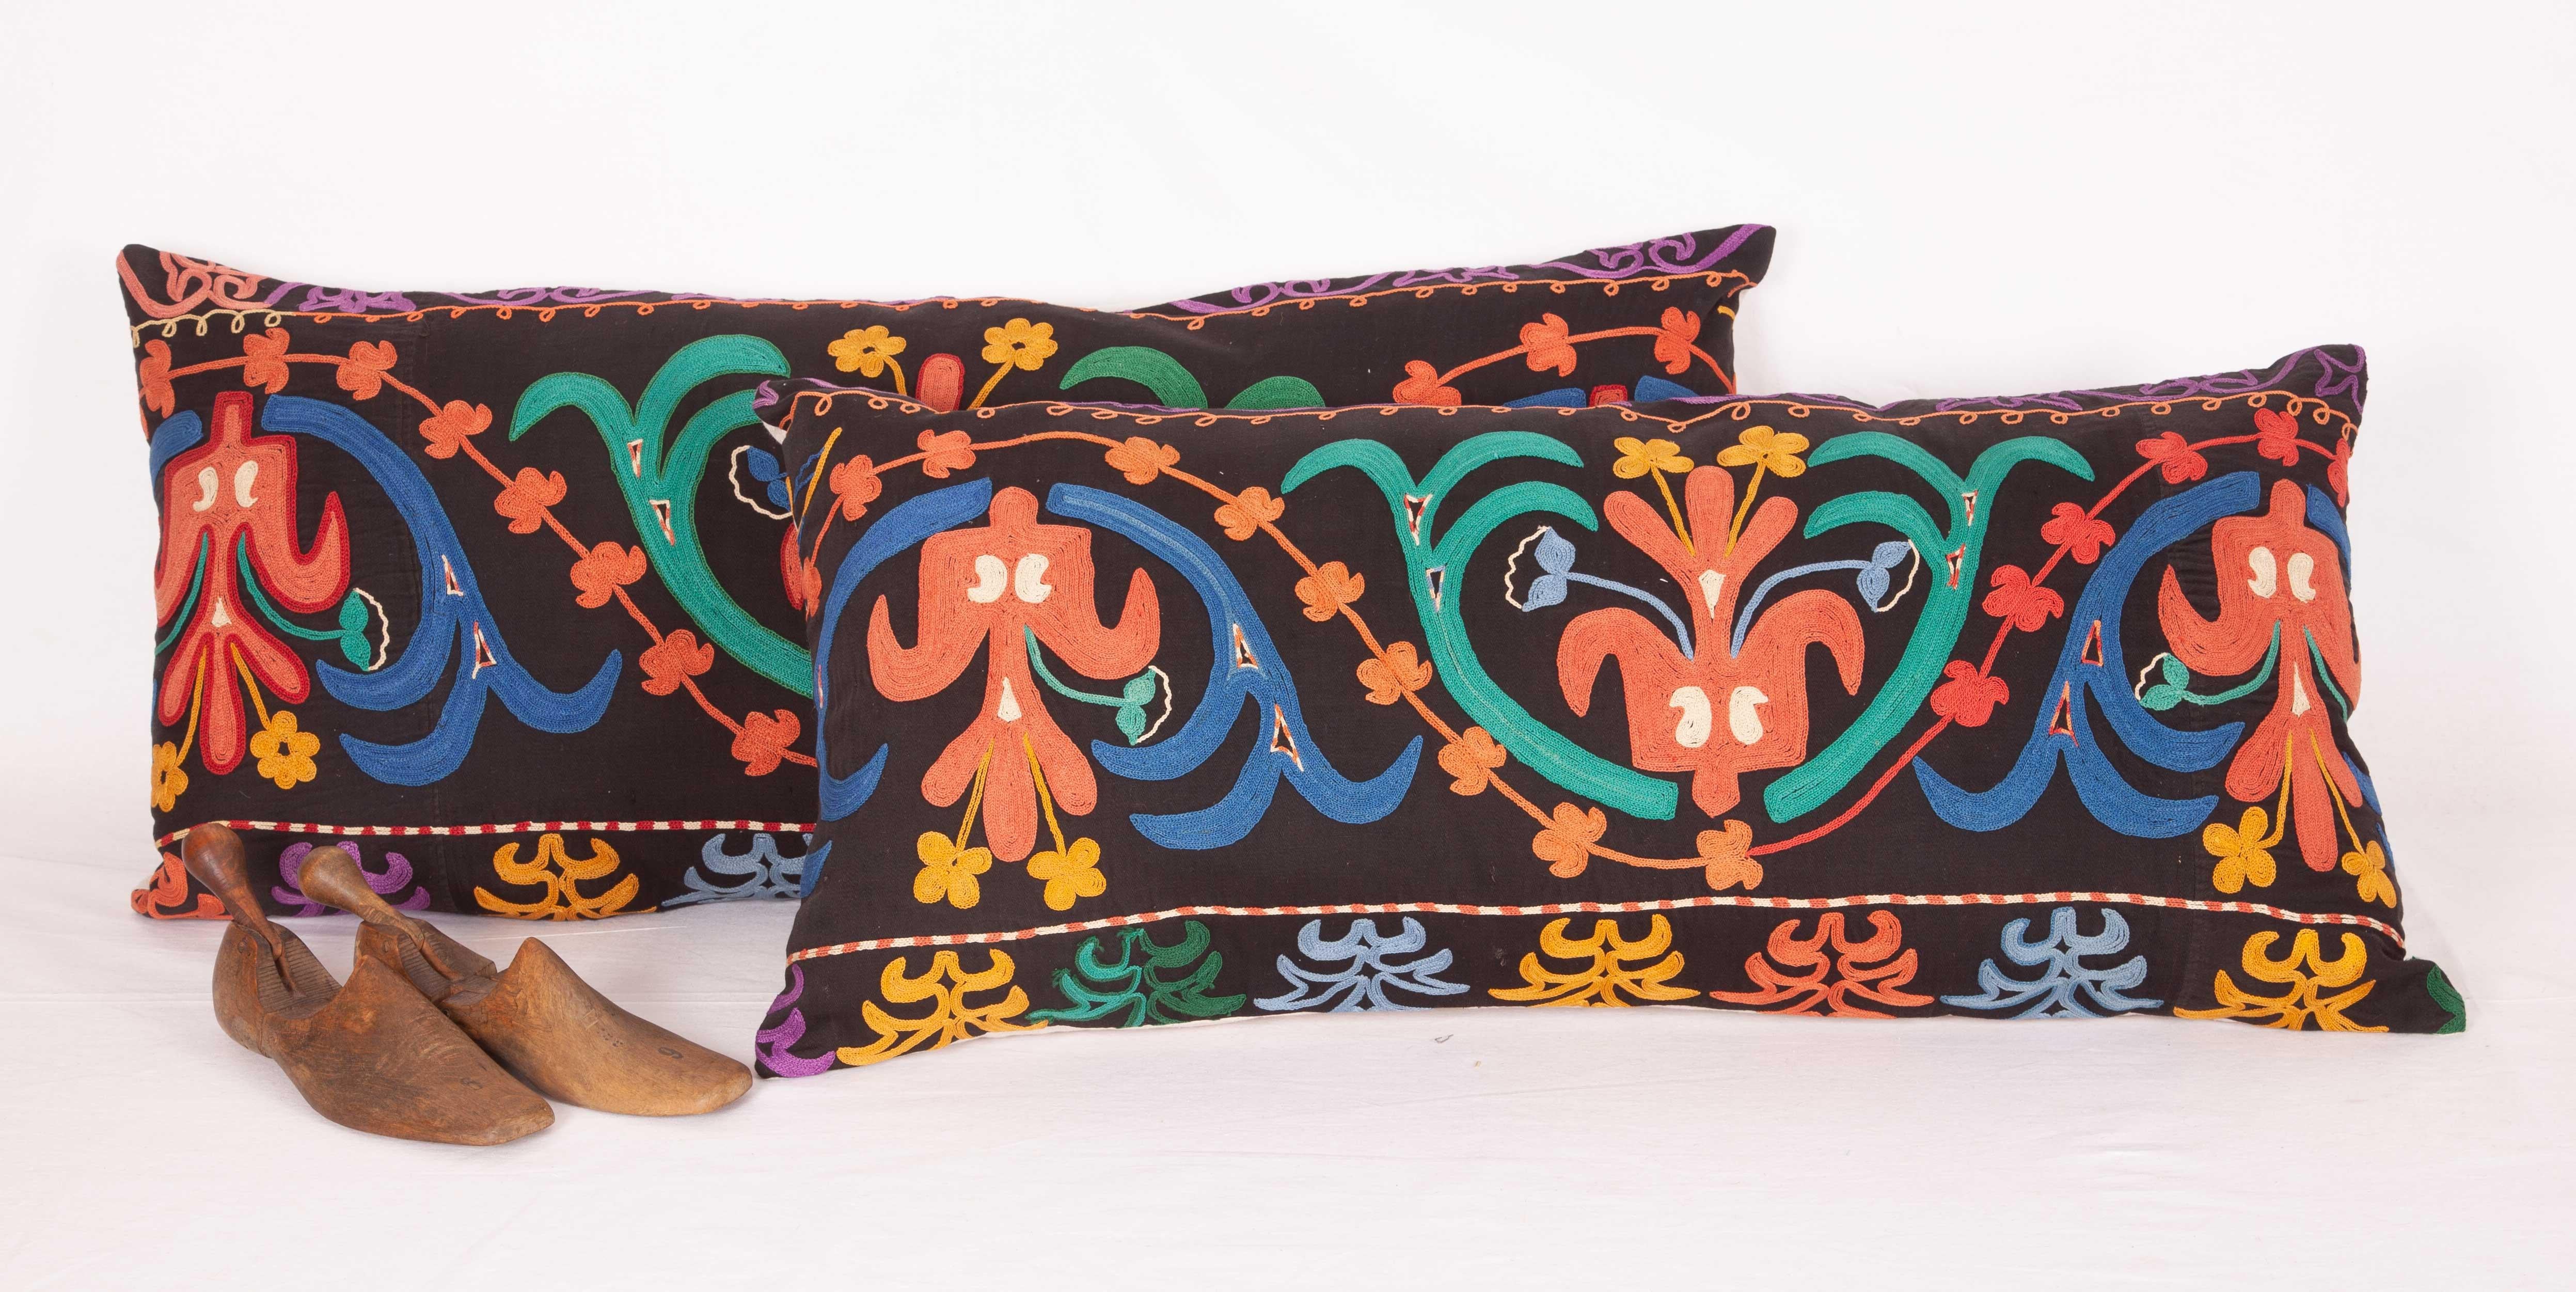 Embroidered Kyrgyz Lumbar Pillow Cases Made from a Mid-20th Century Kyrgyz Embroidery